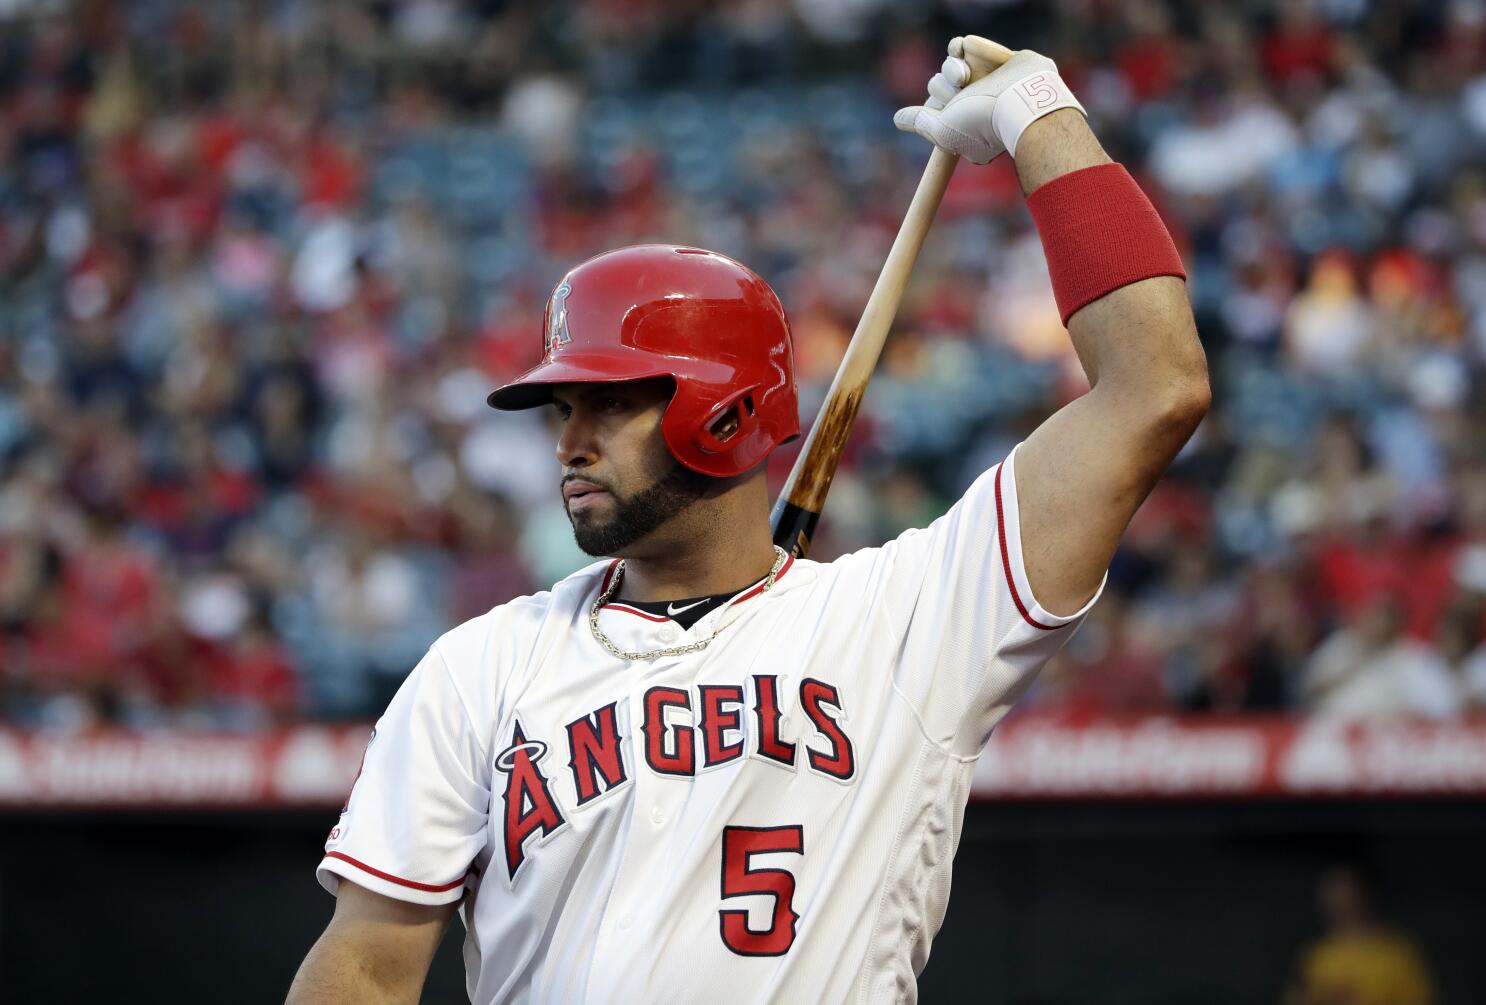 Albert Pujols clears waivers, becomes a free agent - Los Angeles Times